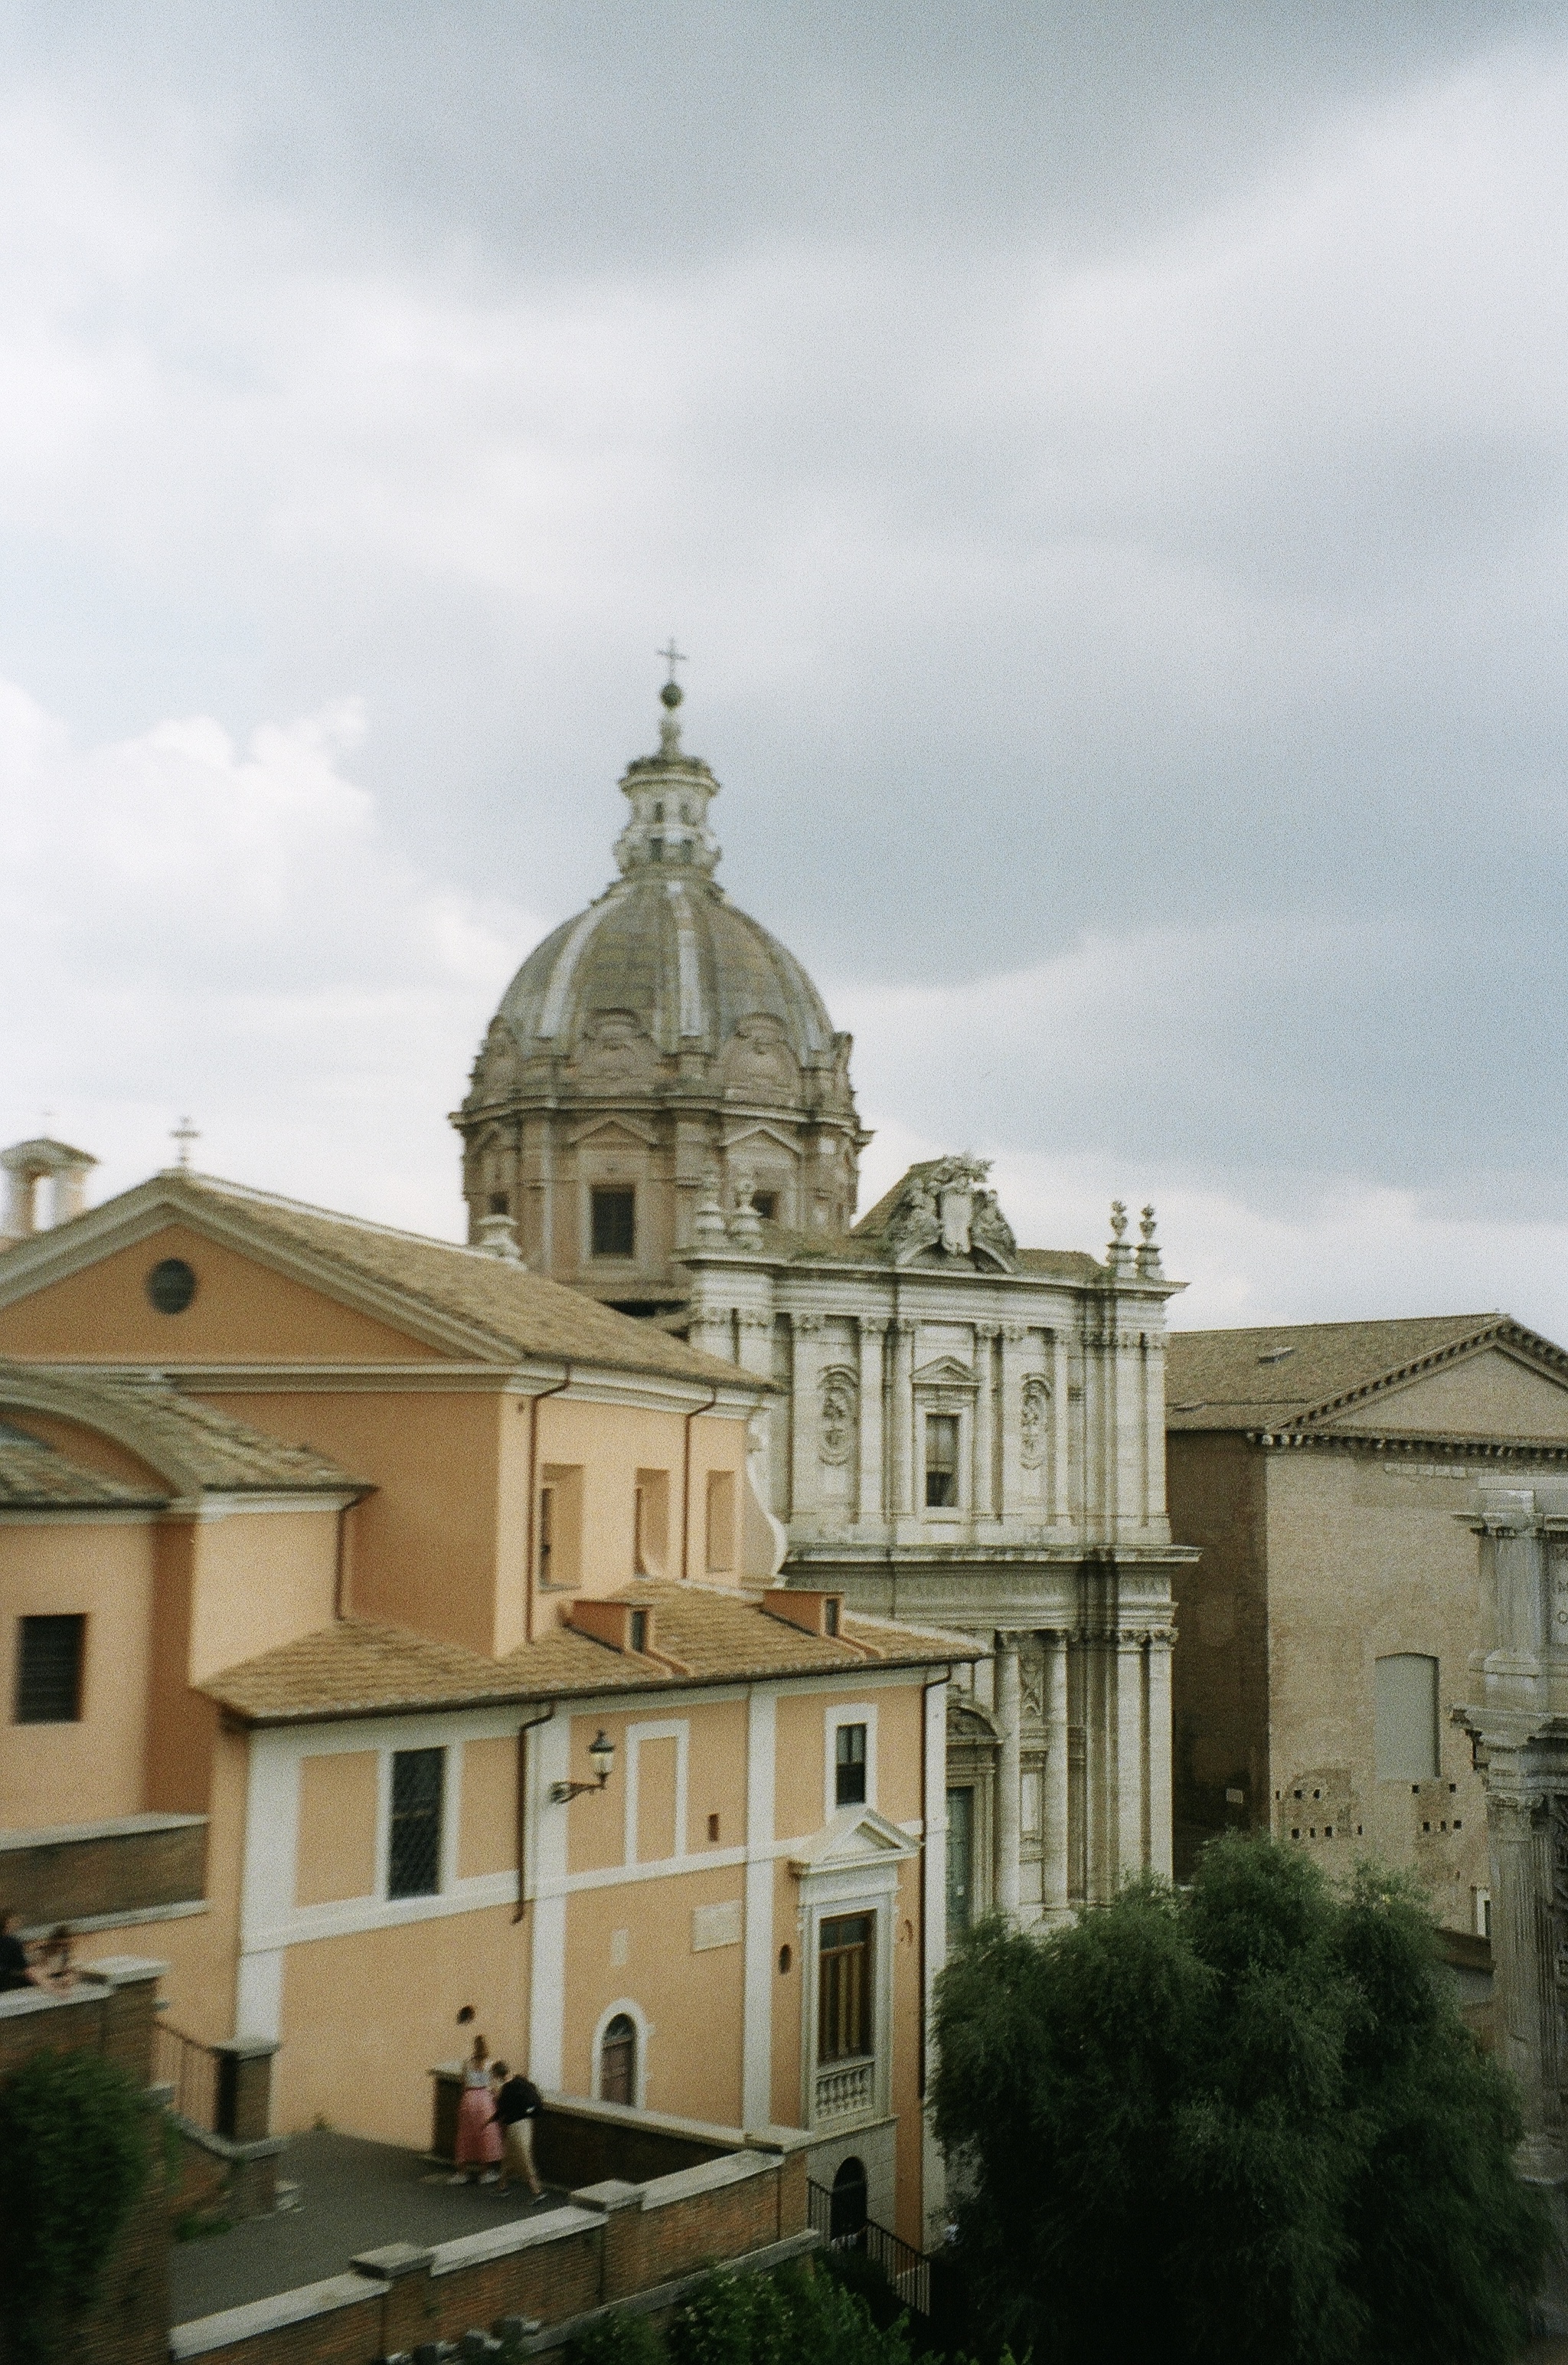 This is an image shot from a rooftop in Rome Italy, looking over some beautiful roftops and a very italian stone dome buildling.